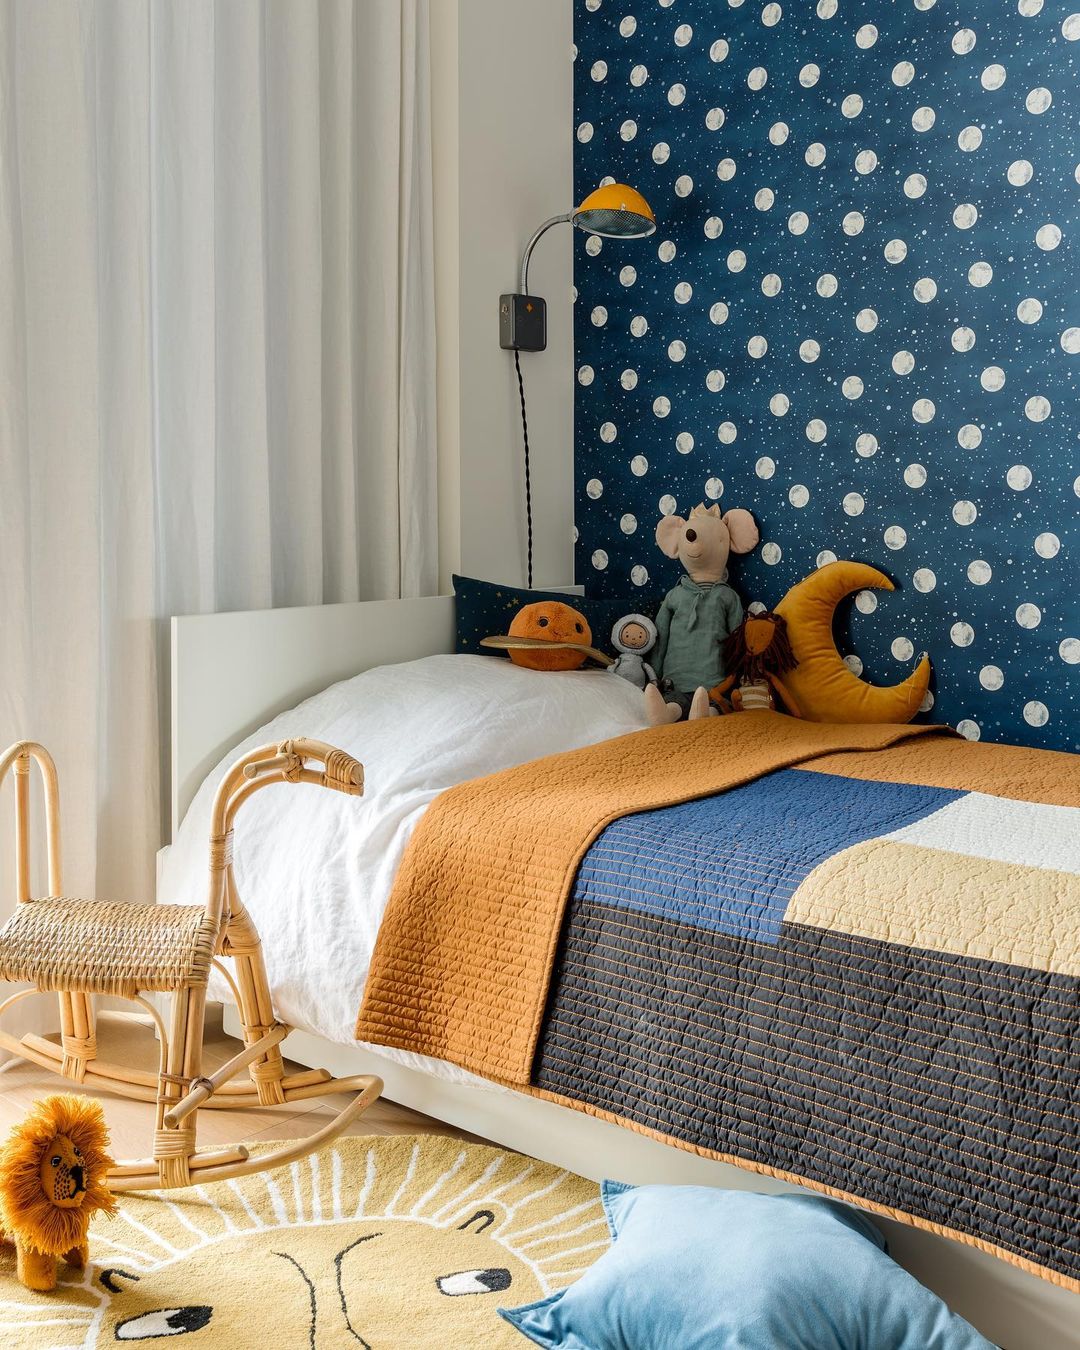 bed with stuffed animals on the side and yellow bedspread